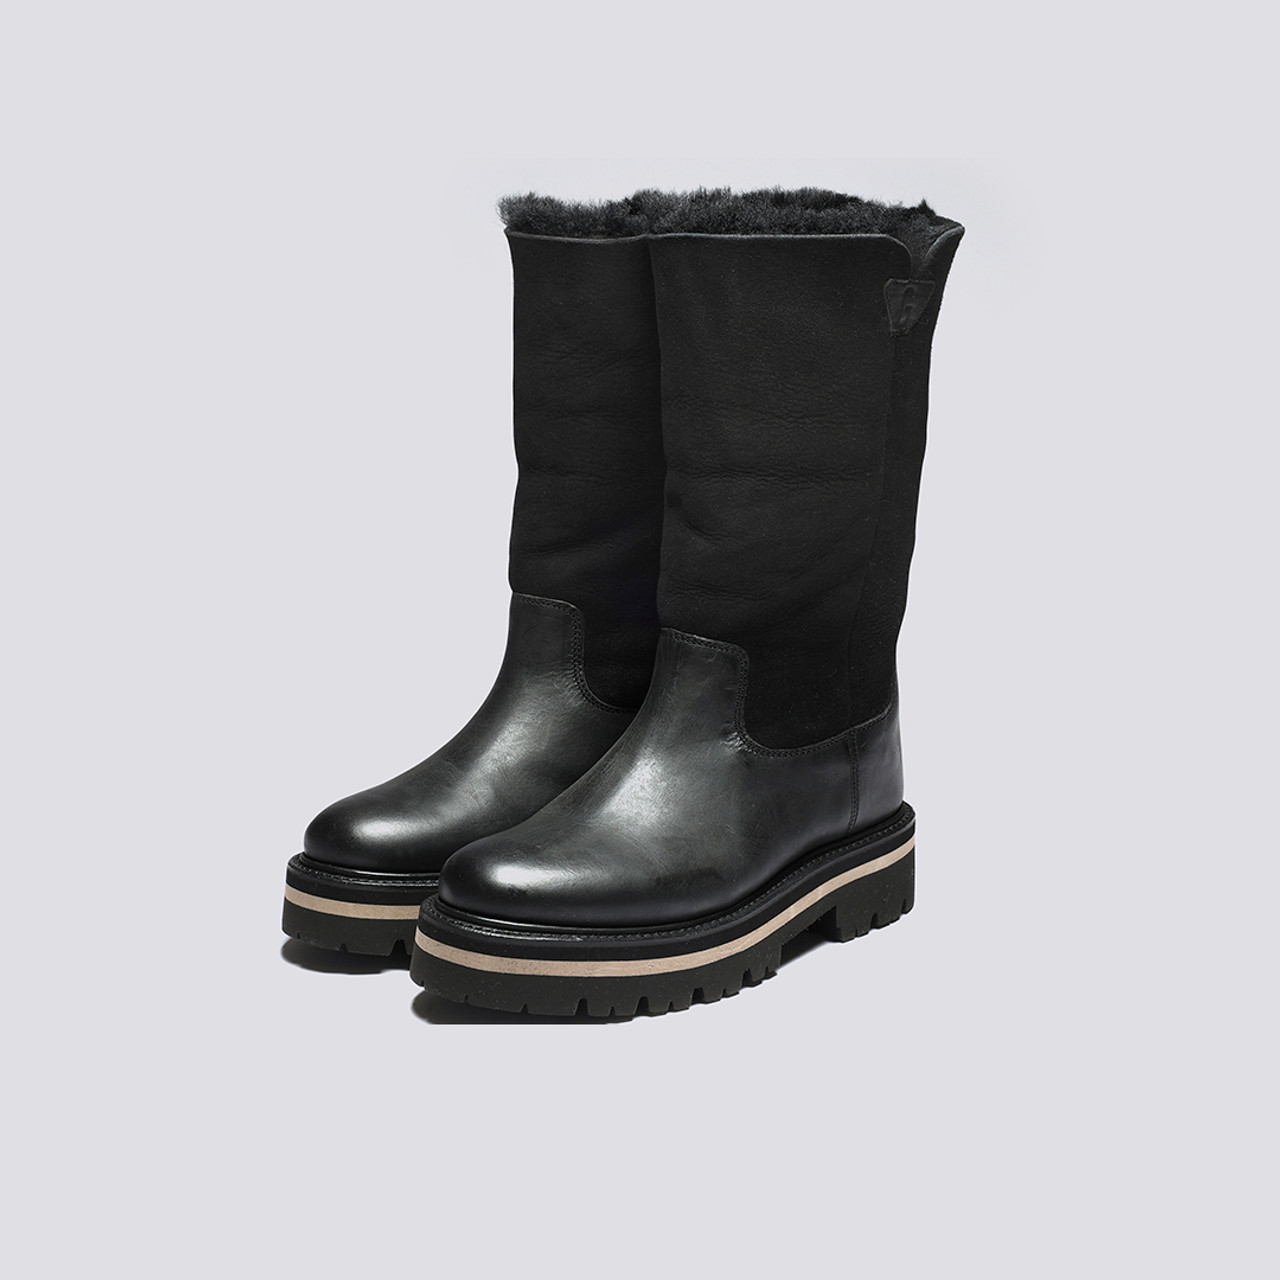 Maryanne | Womens Boots in Black with Shearling | Grenson